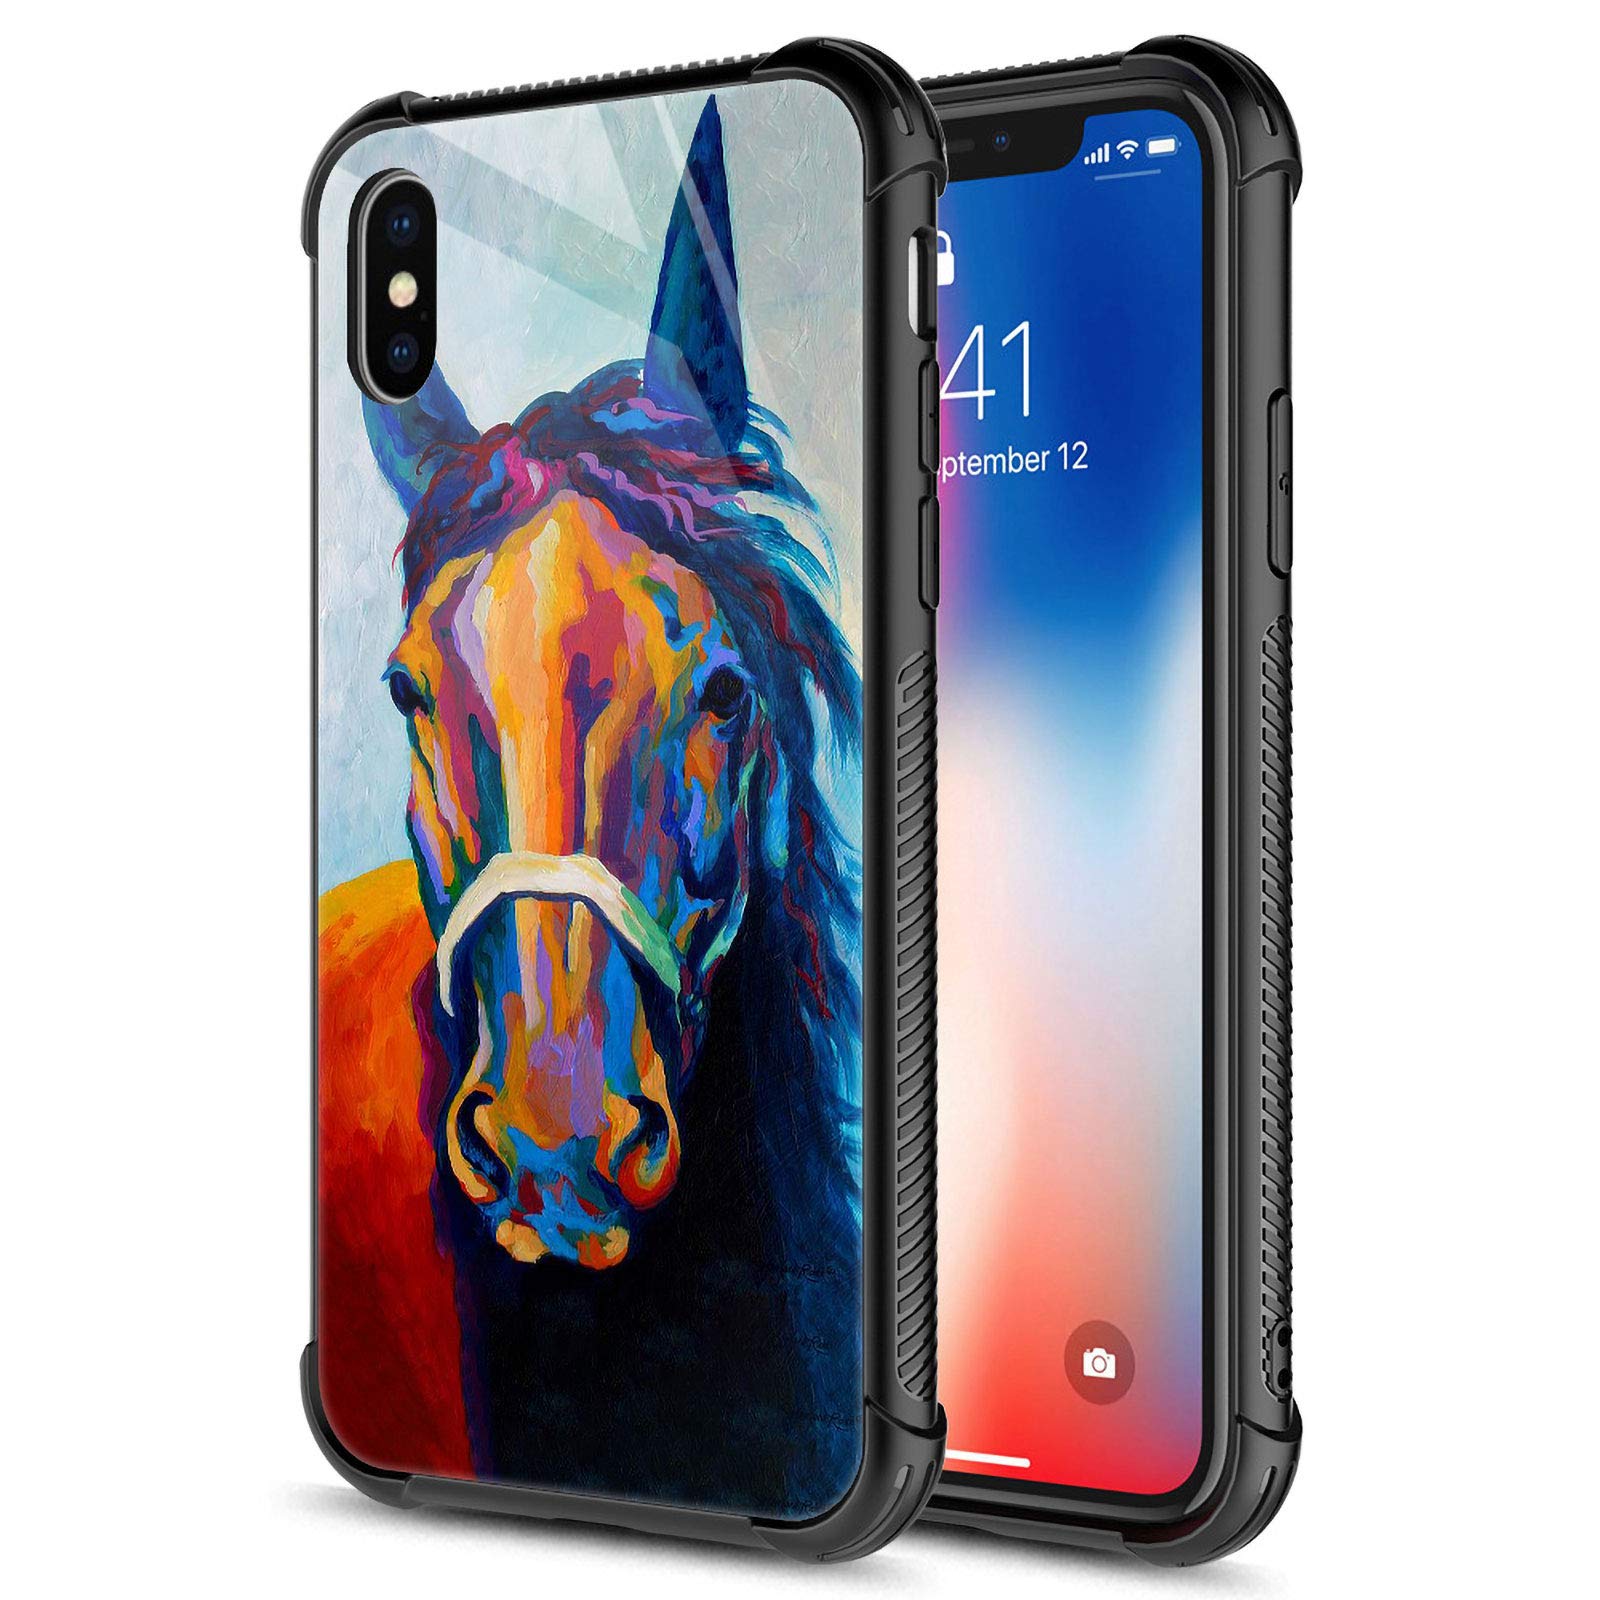 cARLOcA iPhone XR case,colorful Horse iPhone XR cases for girls Boys,graphic Design Shockproof Anti-Scratch Drop Protection case